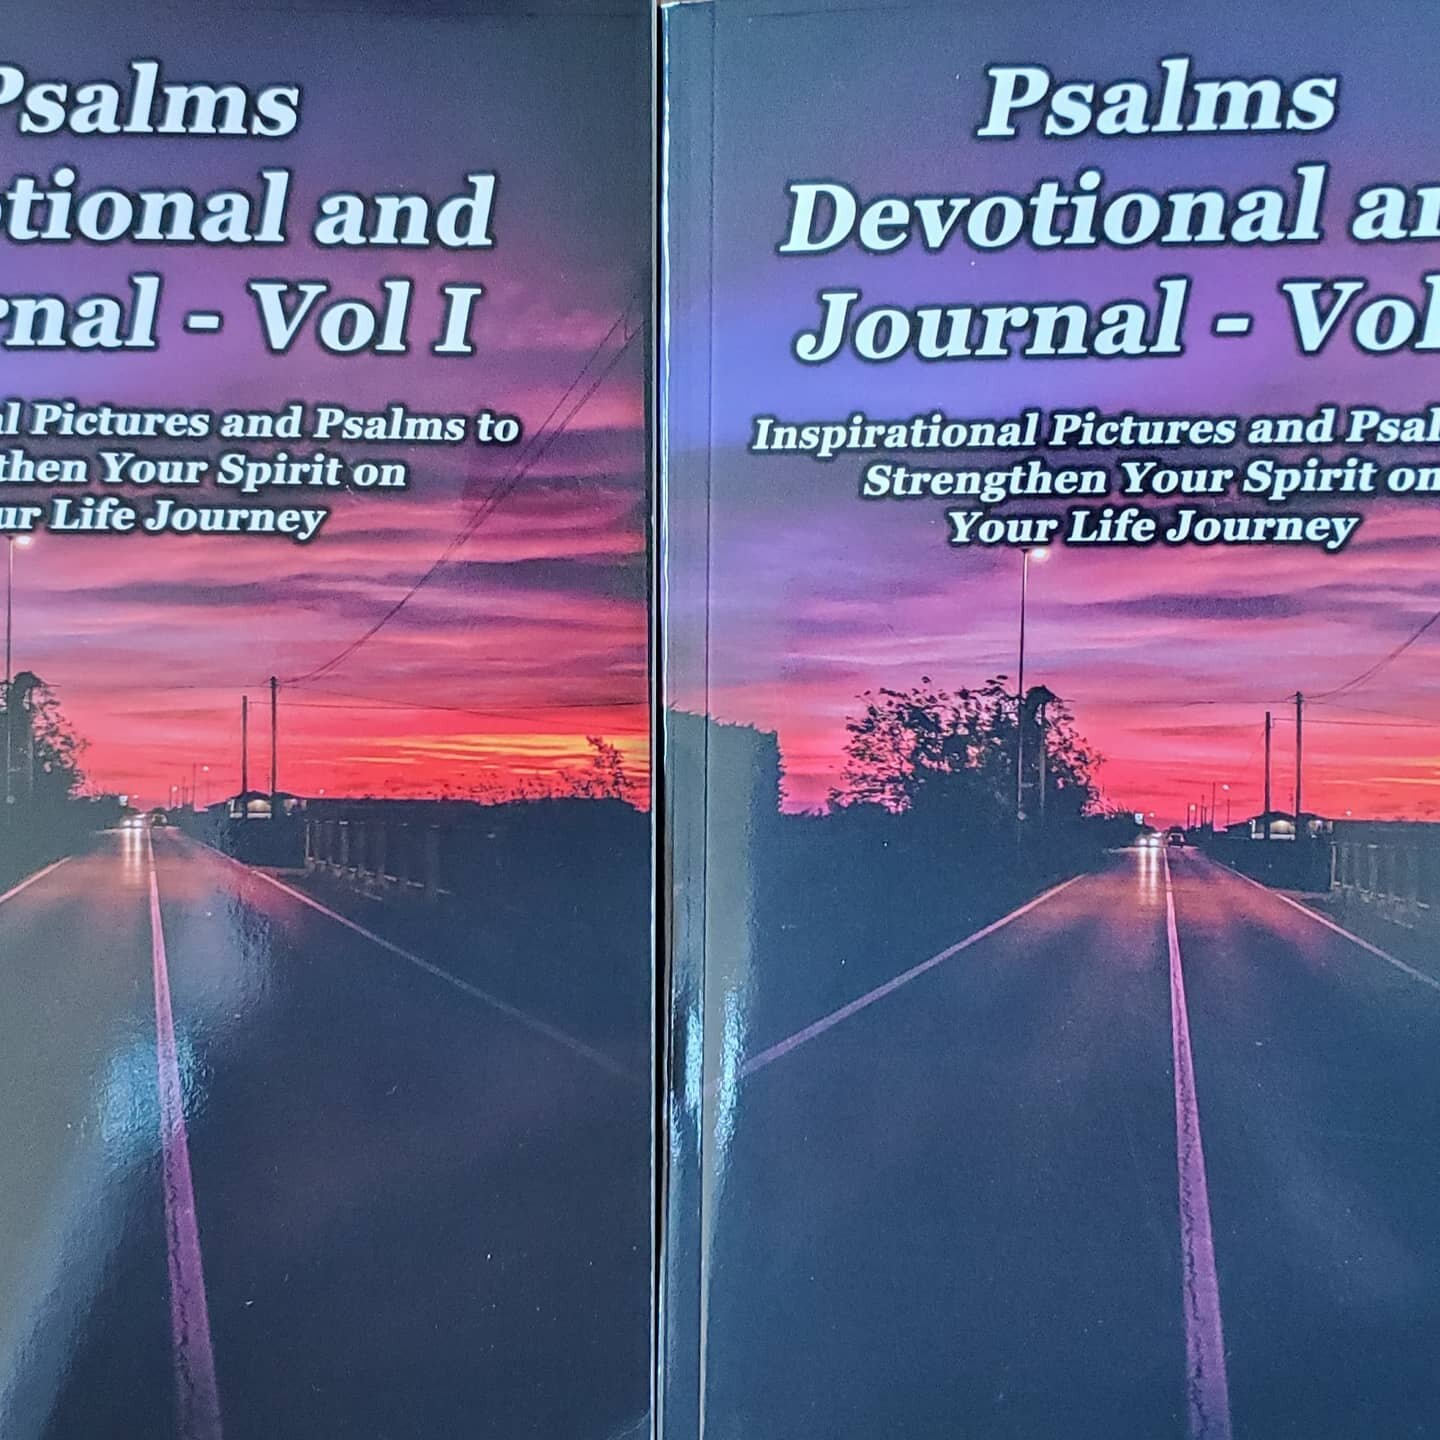 New book published and available on Amazon: Psalms Devotional and Jornal Vol I (Inspirational pictures and Psalms to Strengthen your spirit on your life journey)